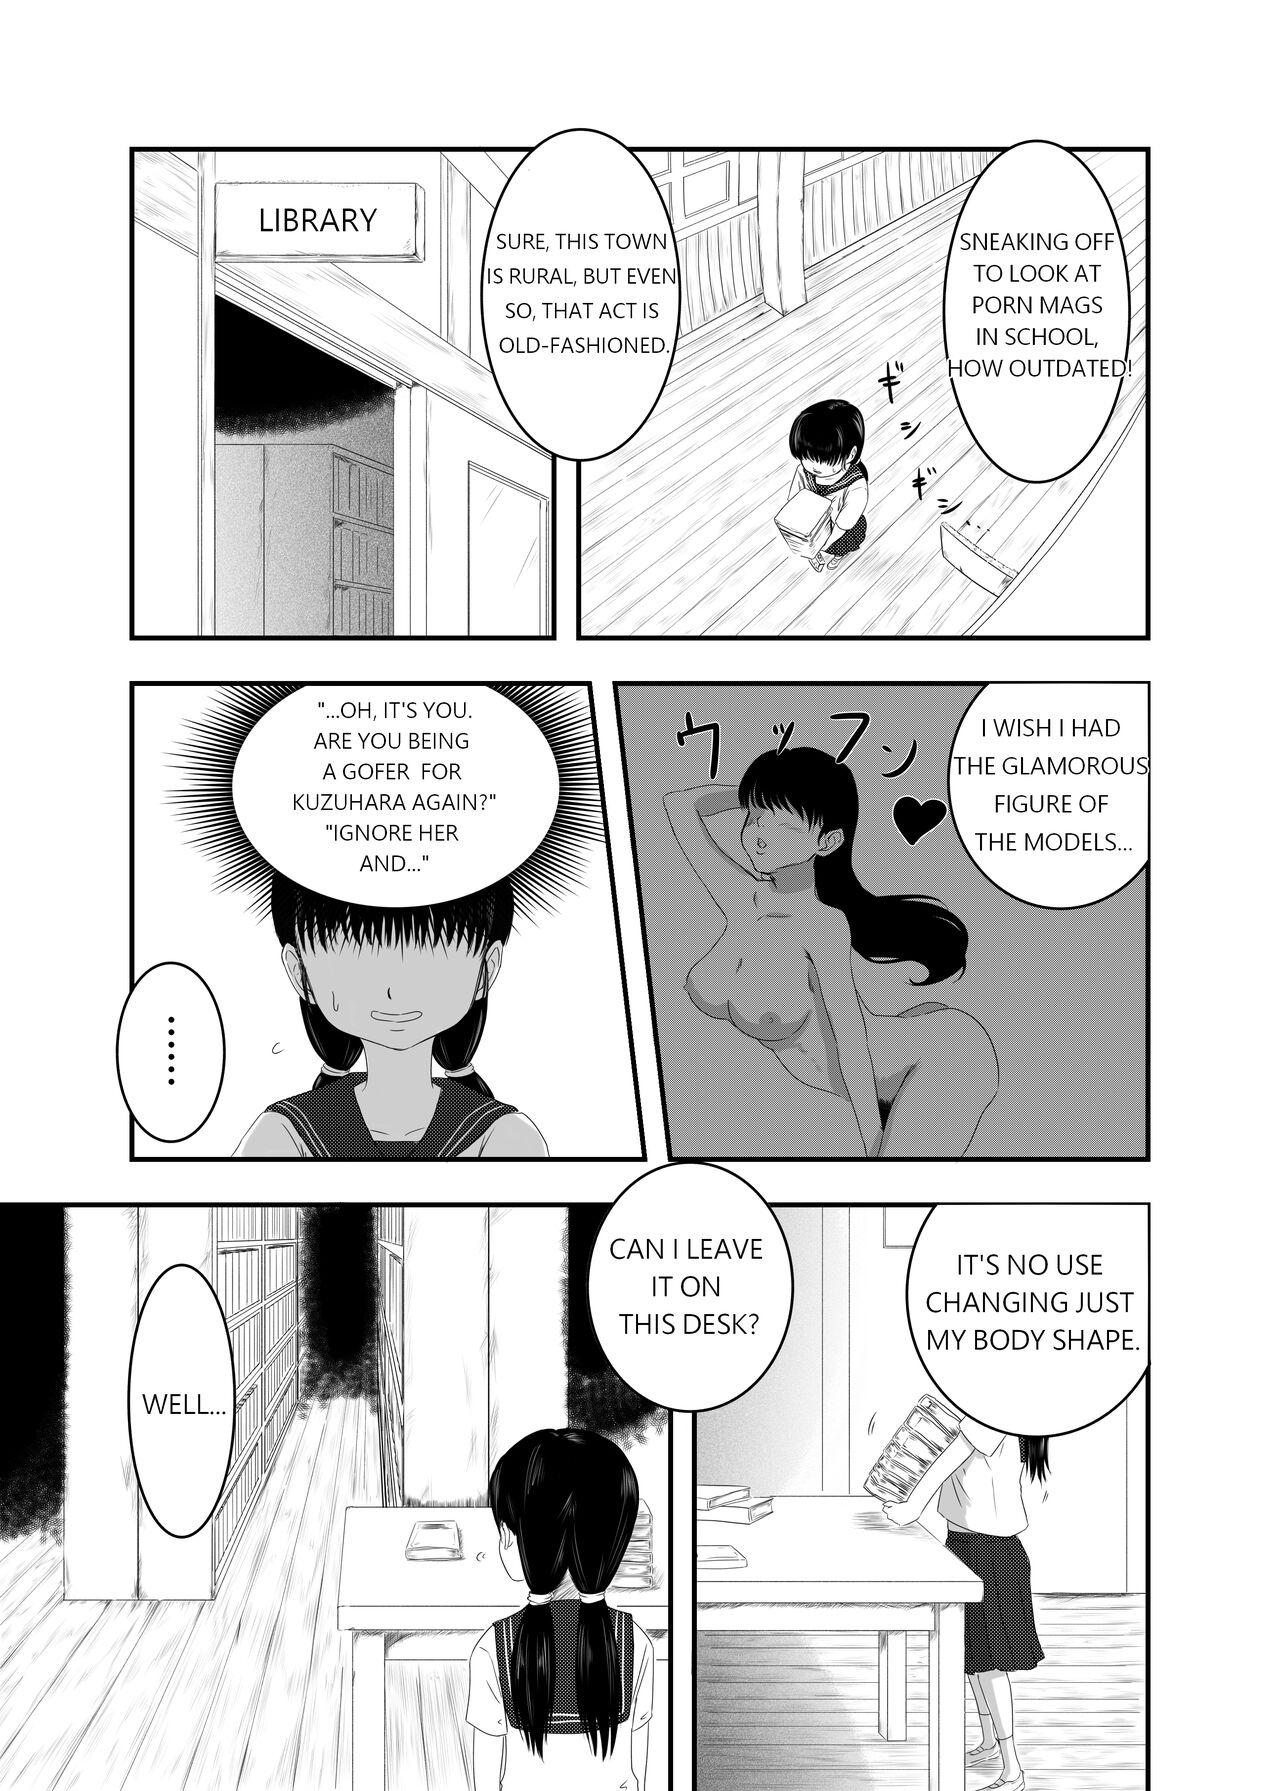 1080p The Evil Mask 1 - The mask 4some - Page 5